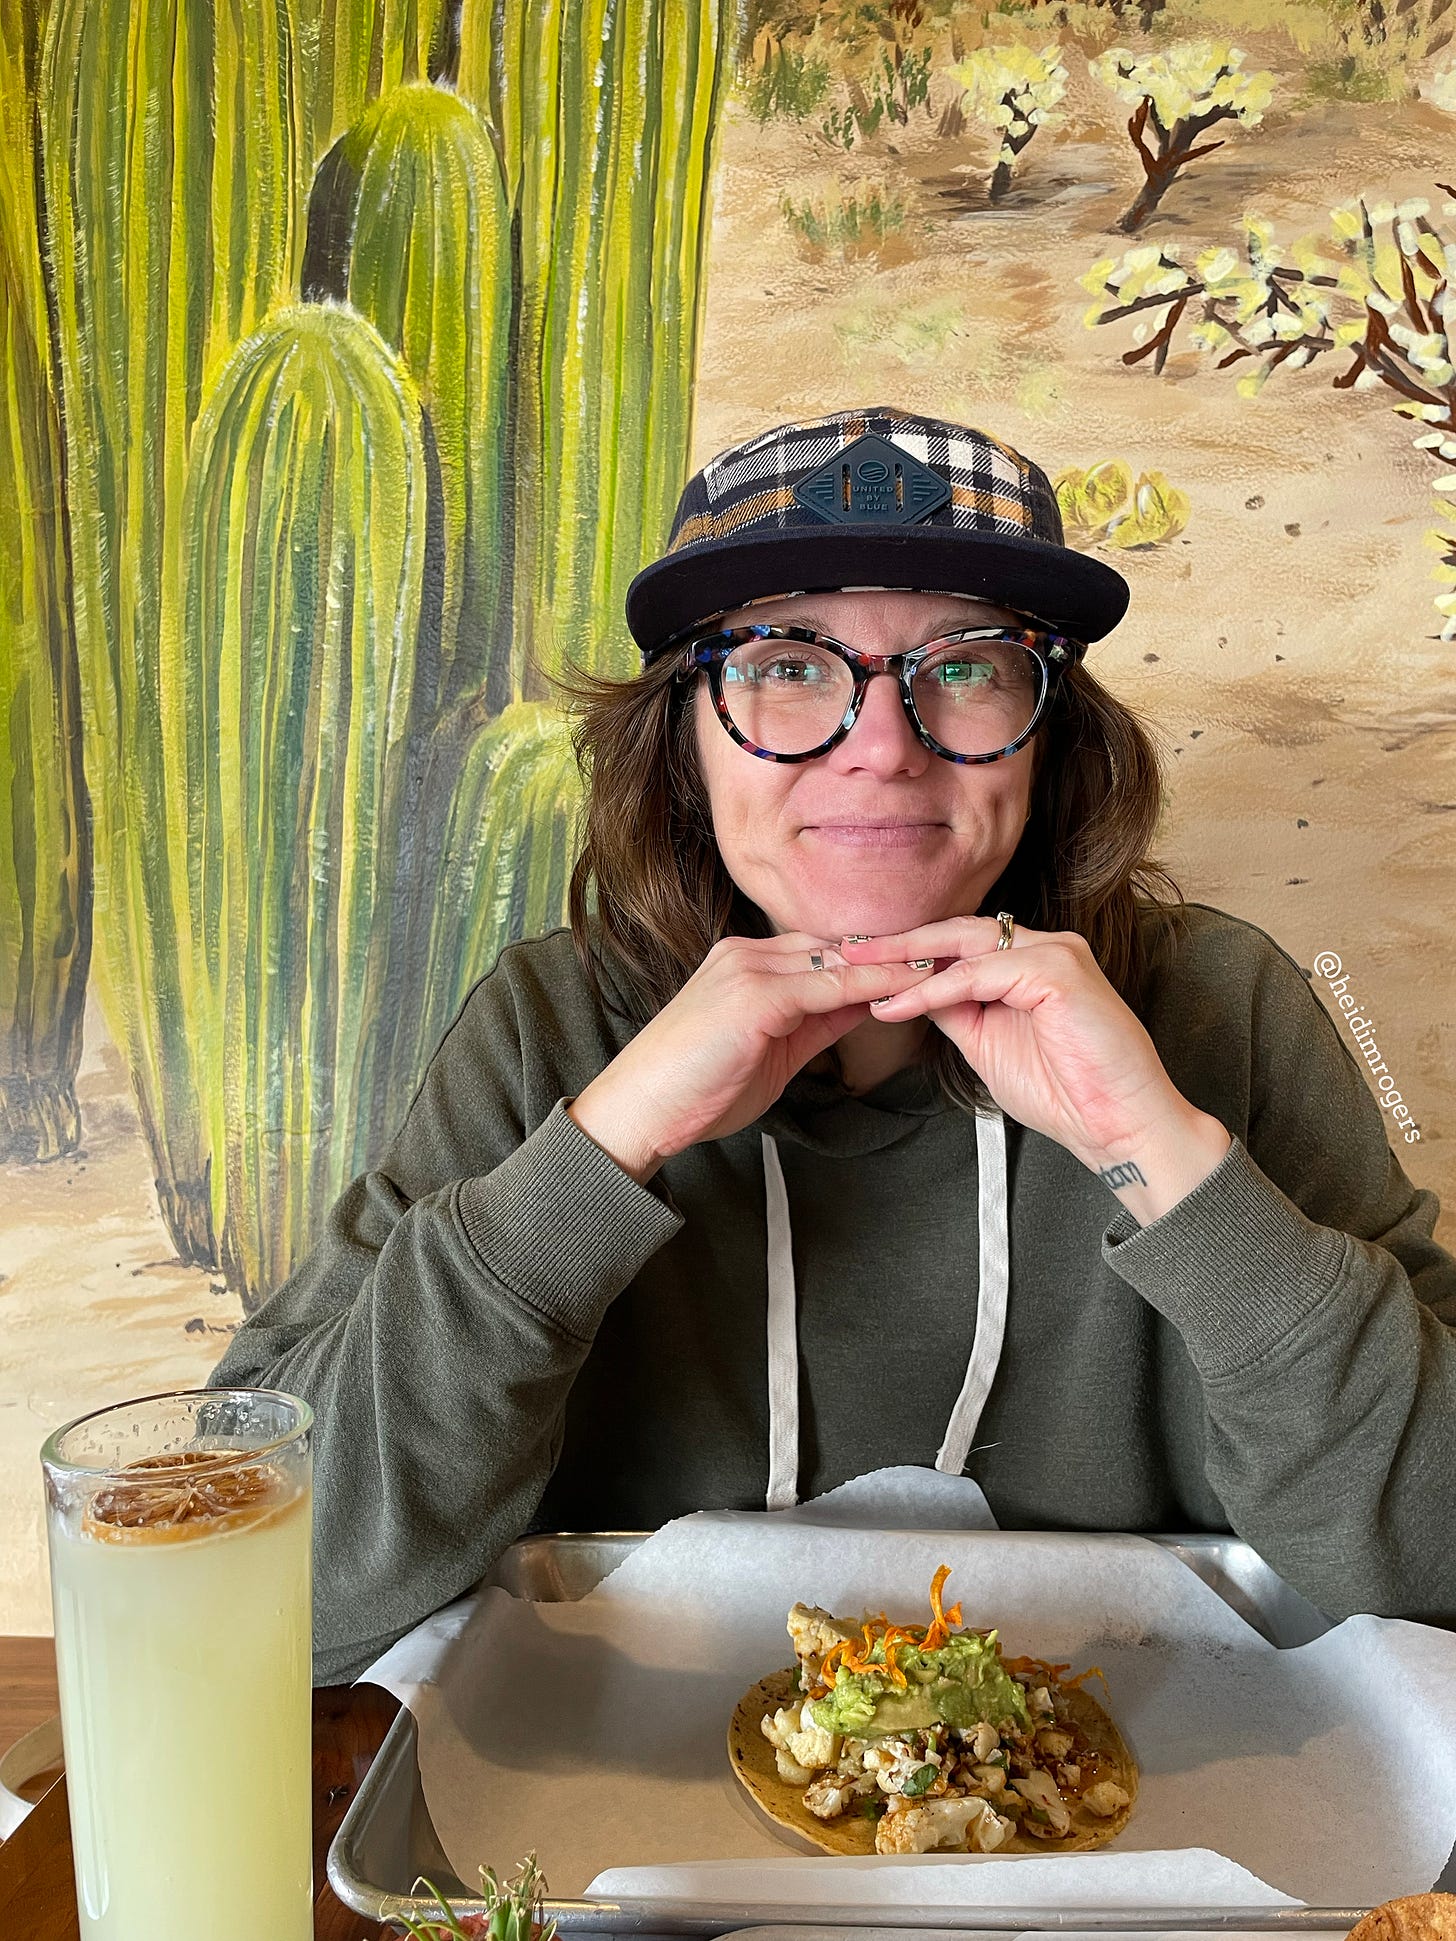 Portrait of Heidi M. Rogers, hands clasped under her chin, wearing a hat and glasses, in front of a mural with cactus and dirt. A plate of tacos and a cocktail are in front of her.